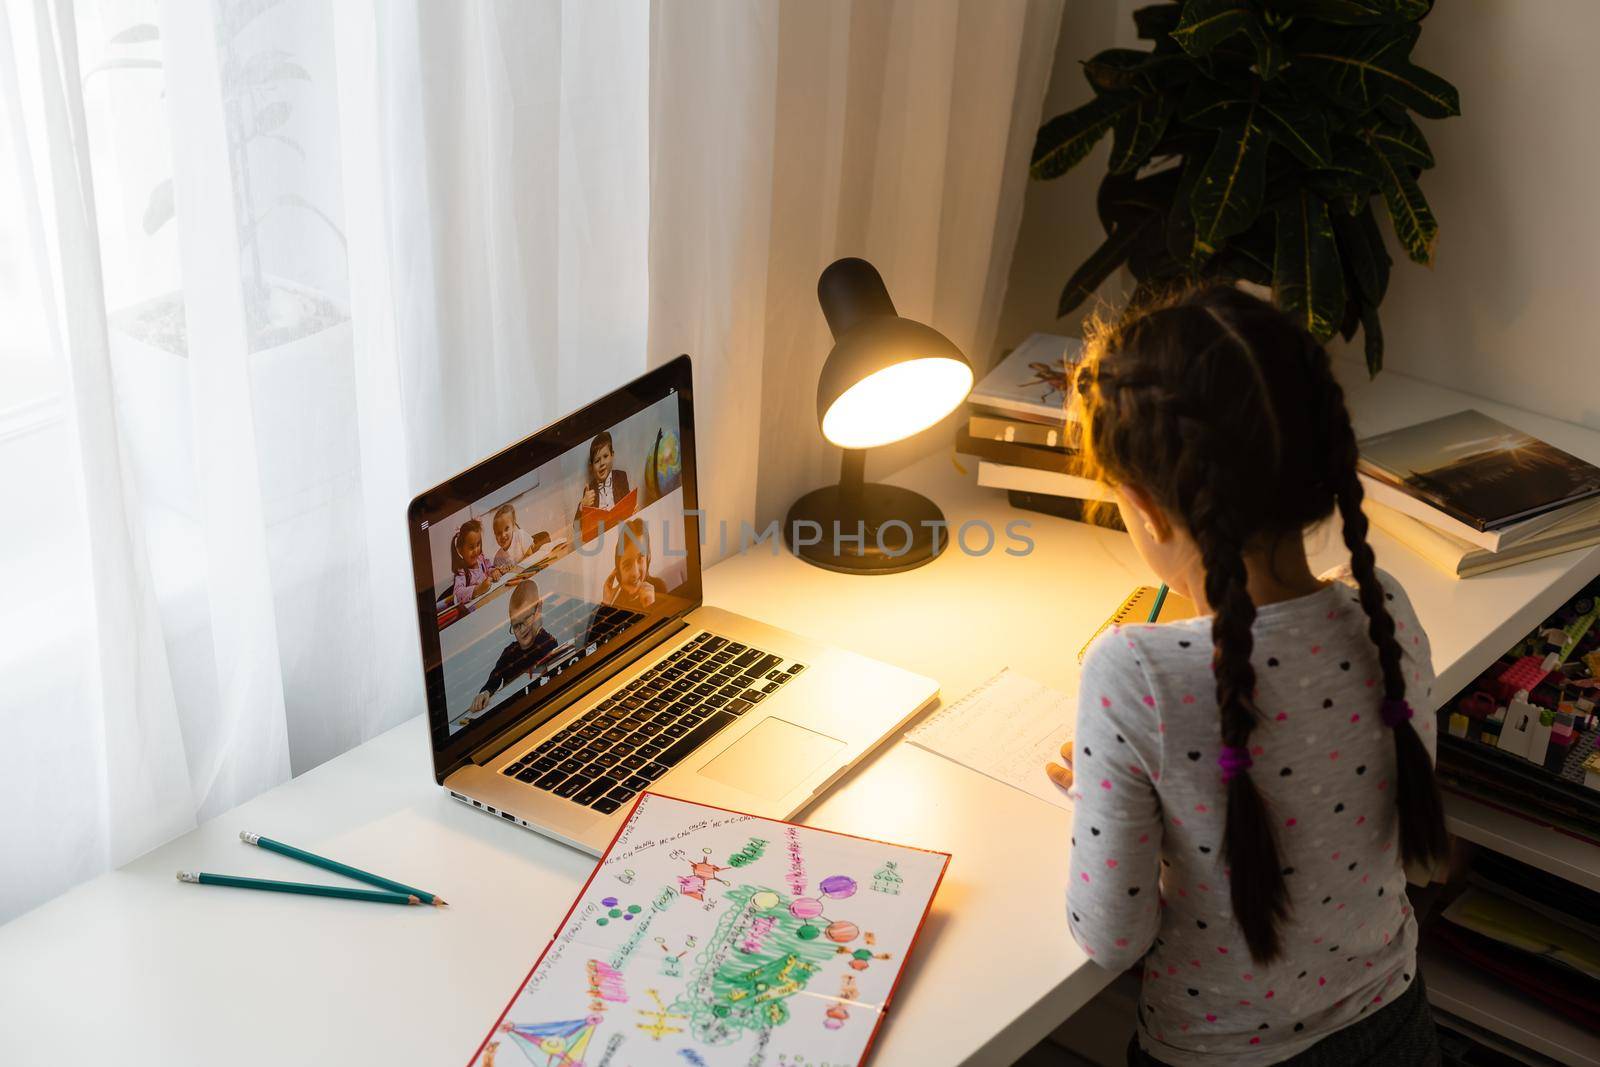 Little girl studying online using her laptop at home